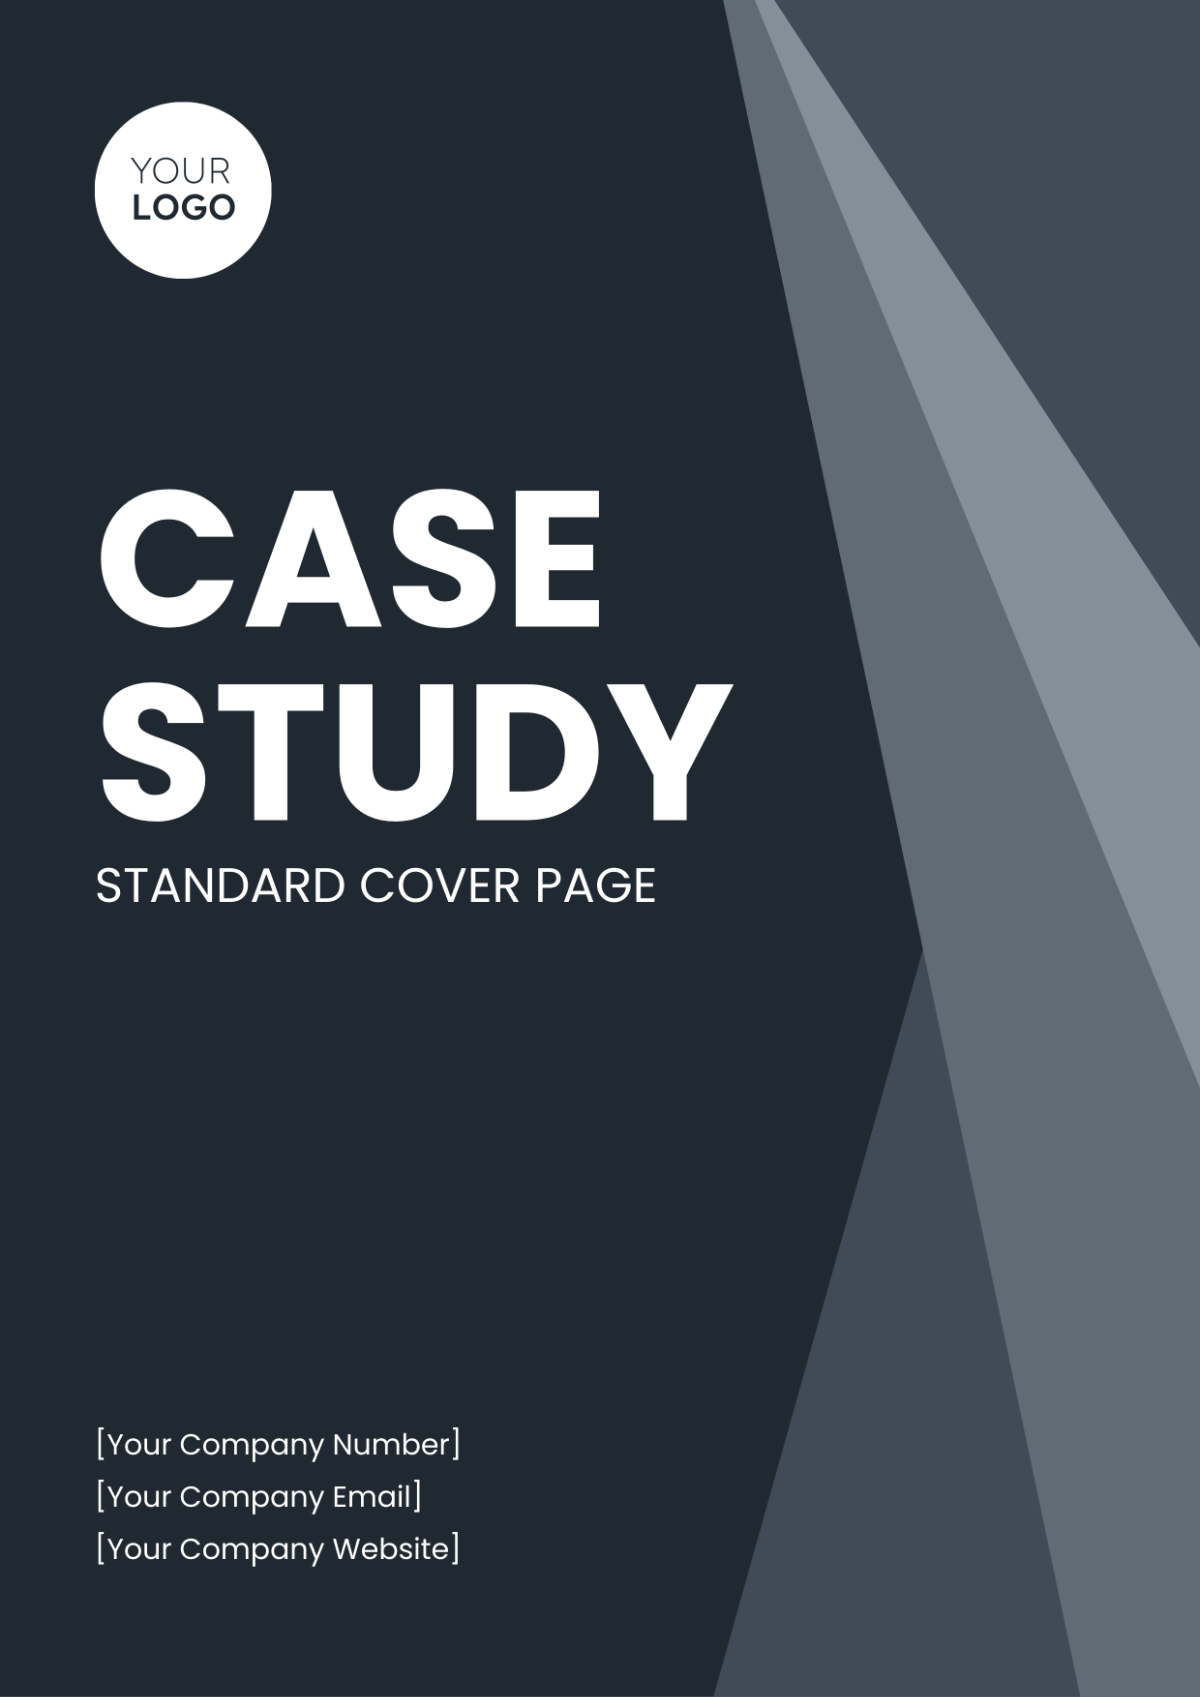 Case Study Standard Cover Page